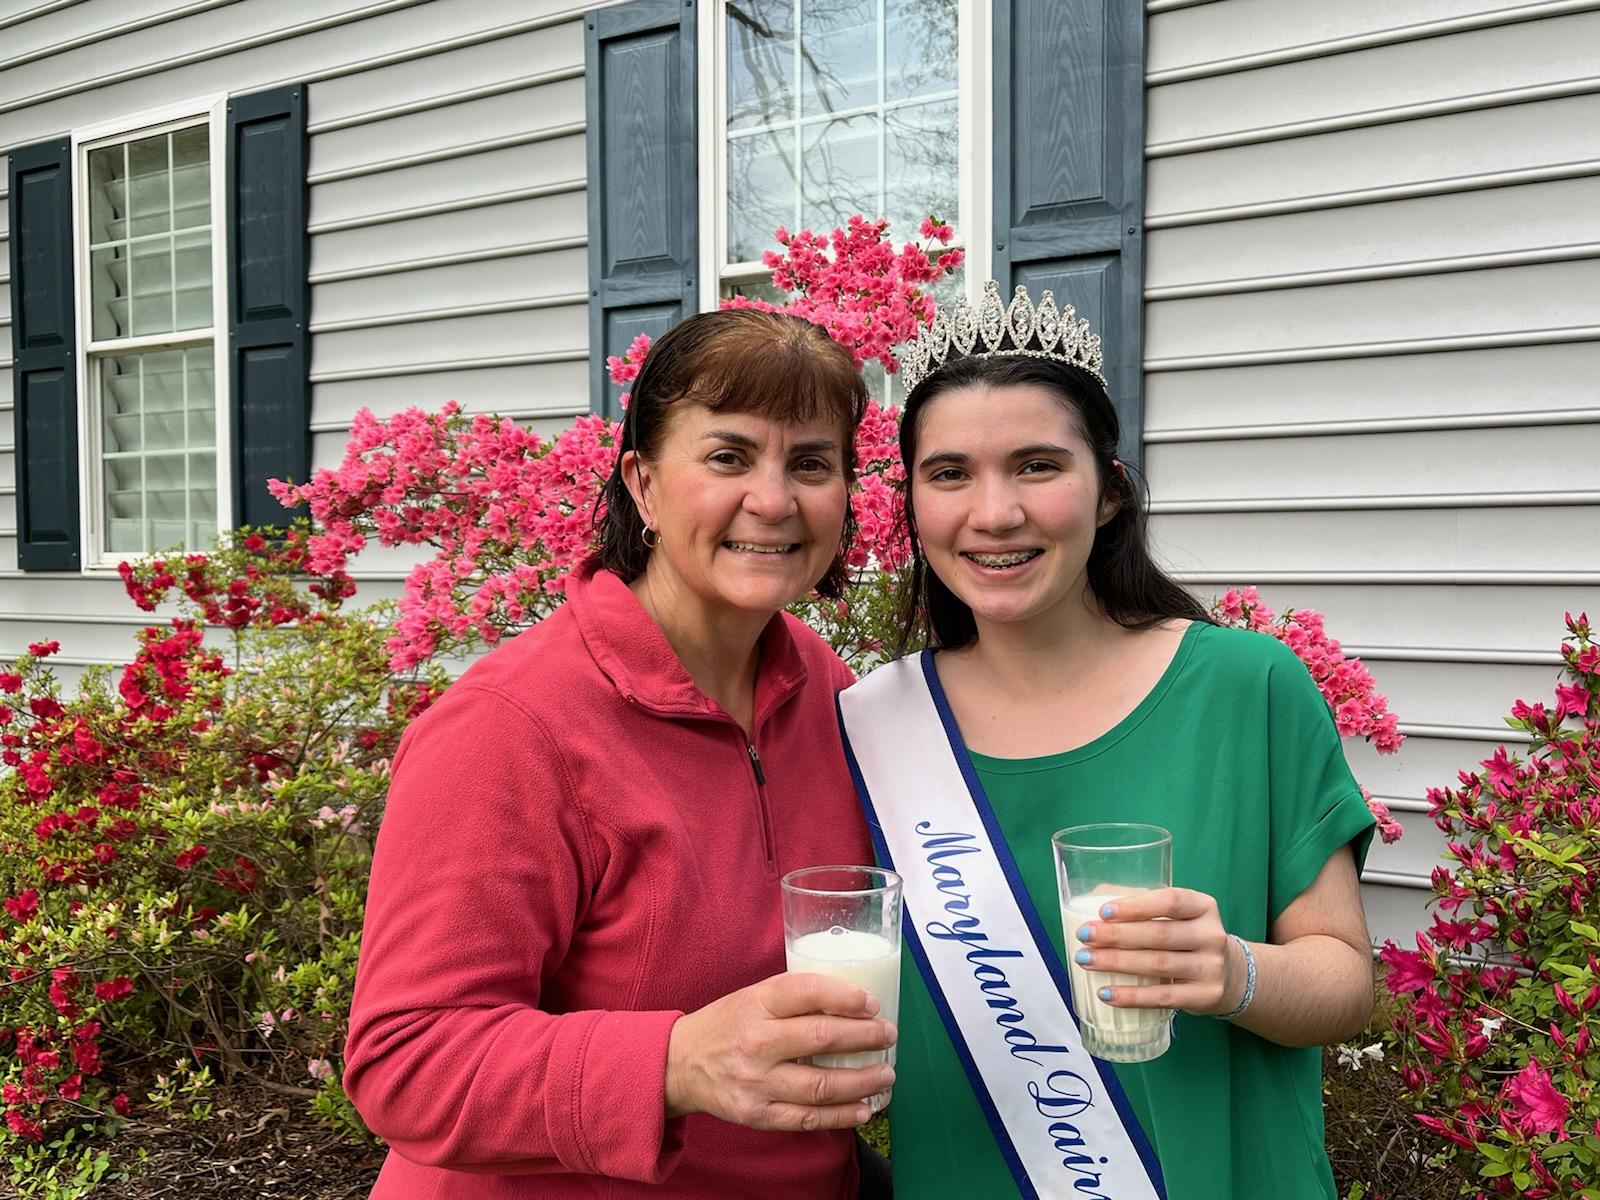 Maryland Dairy Princess Promotes Retail Campaign to Secure Milk for Families in Need